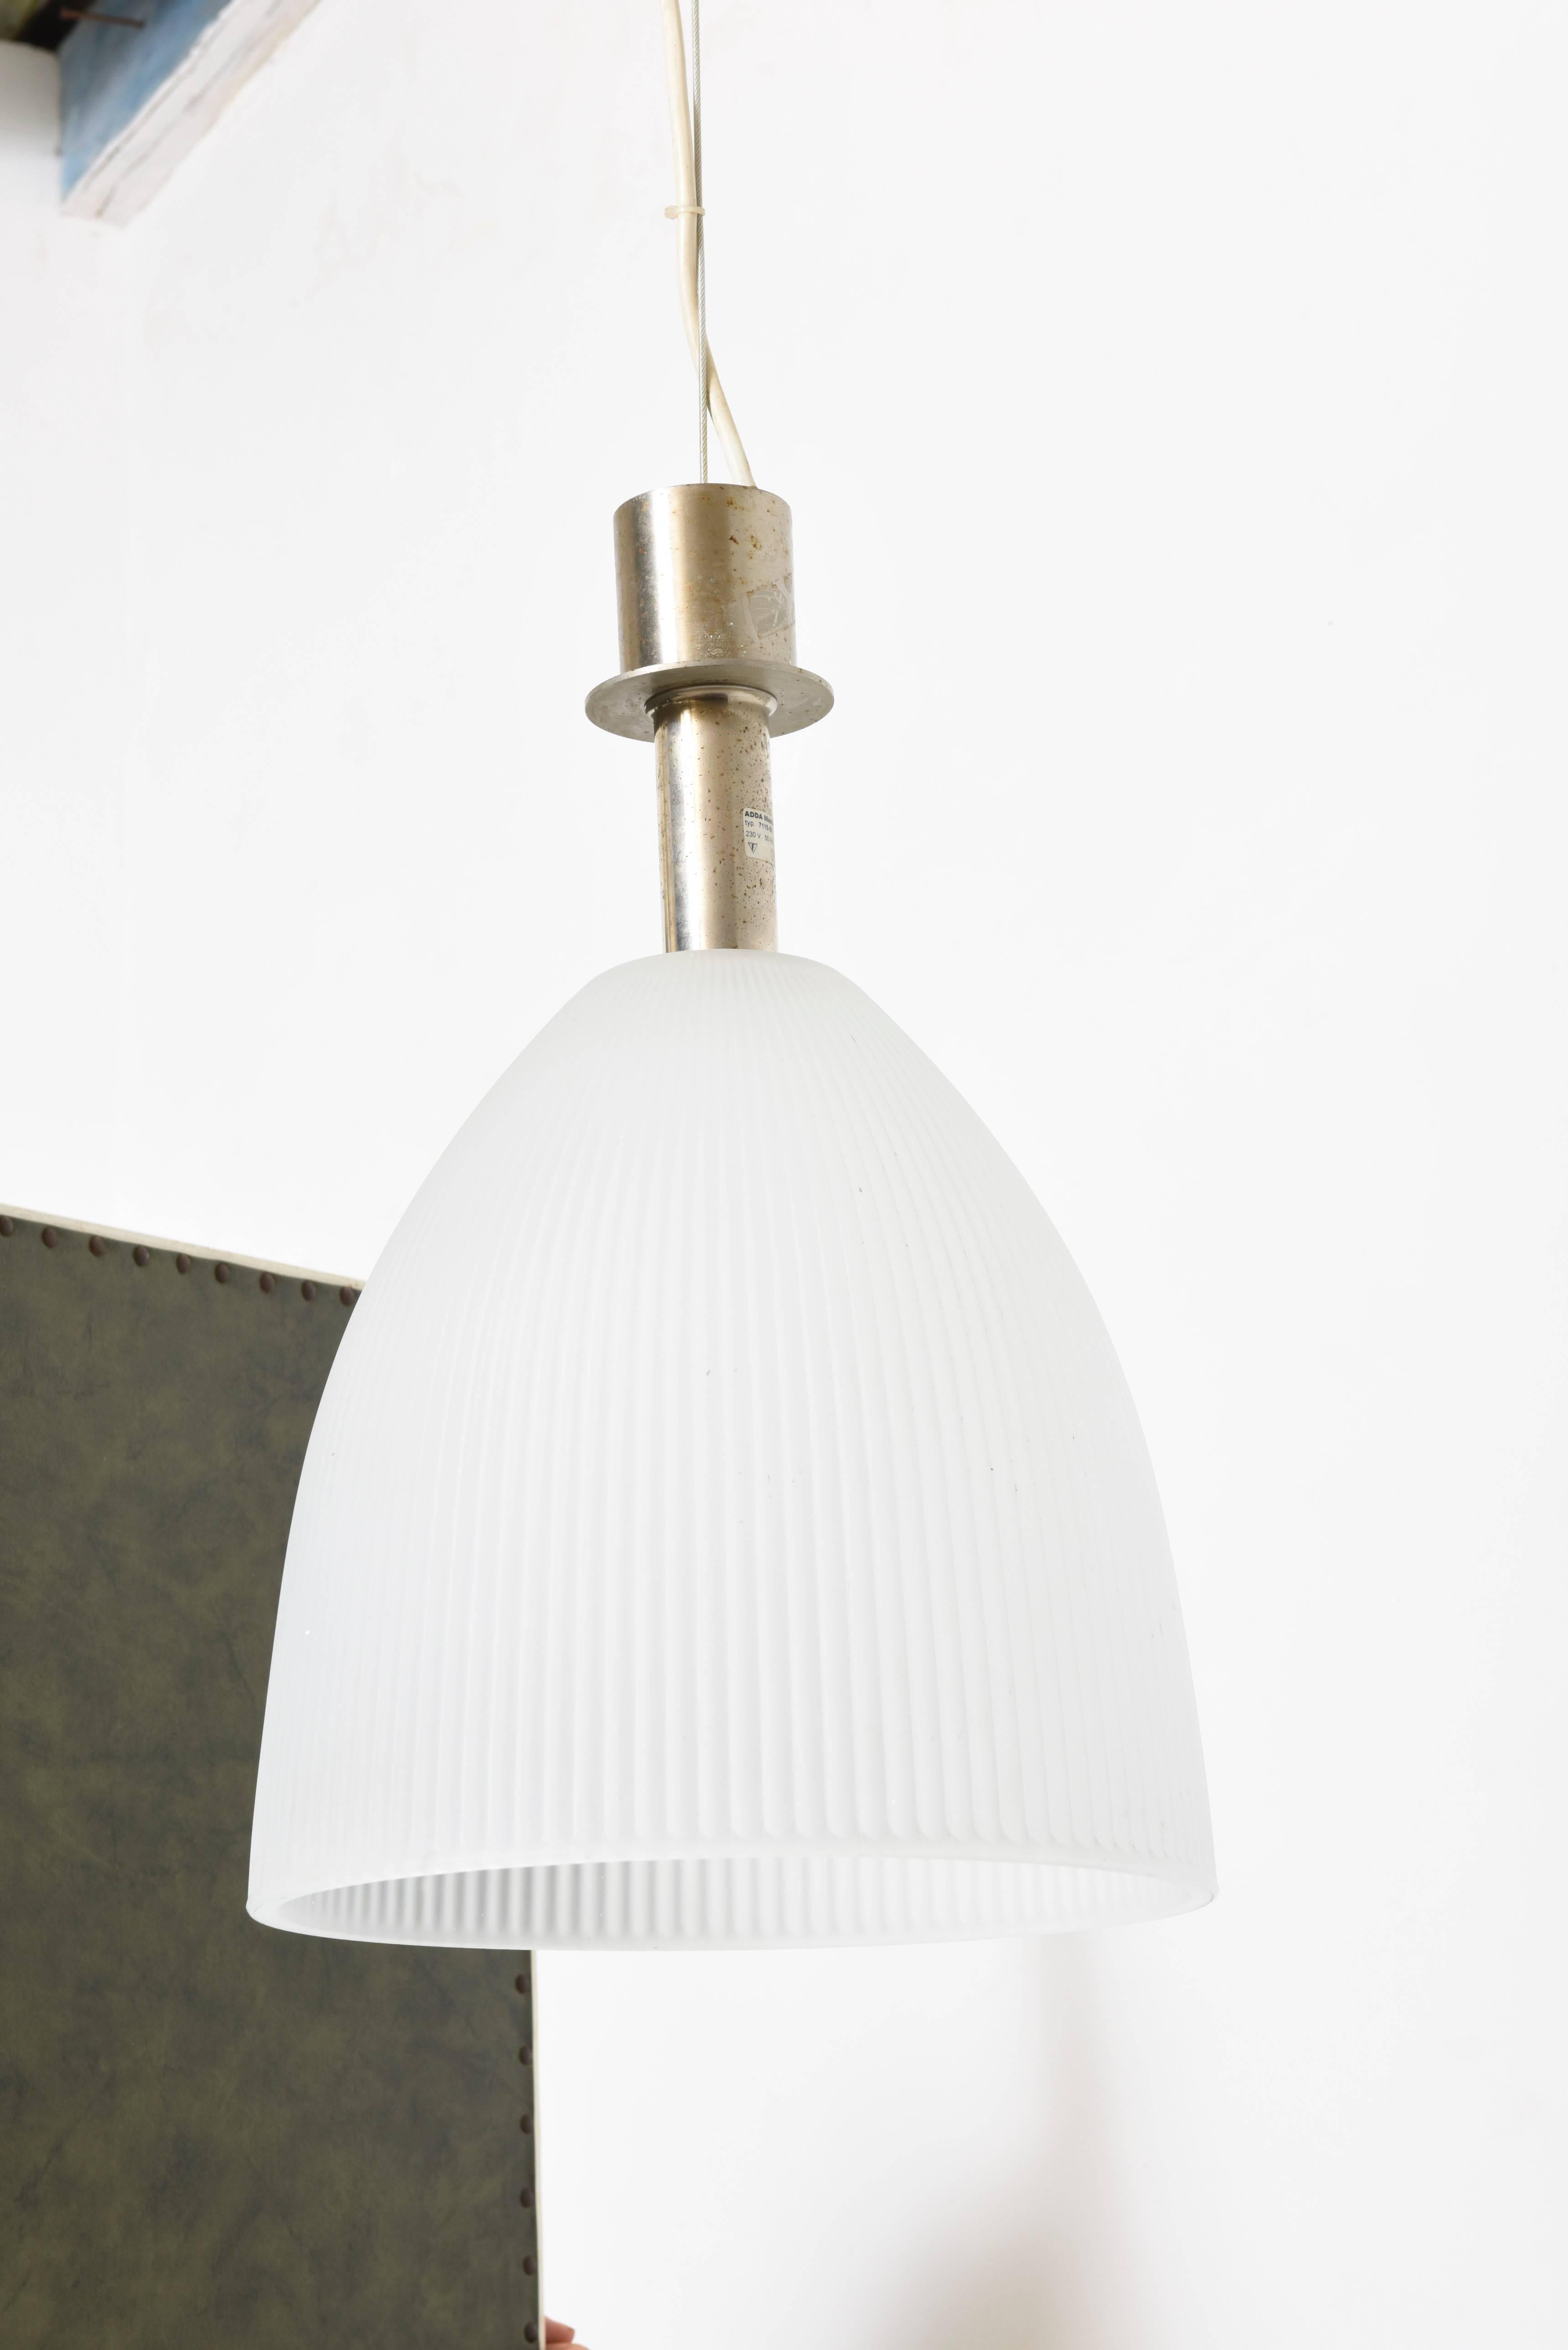 The authentic, Halophane glass shade diffuses light to provide functional and stylish illumination.

The pendant is a standout in any room and provides a fun and functional way to light islands, bars or dining areas and can be used individually or